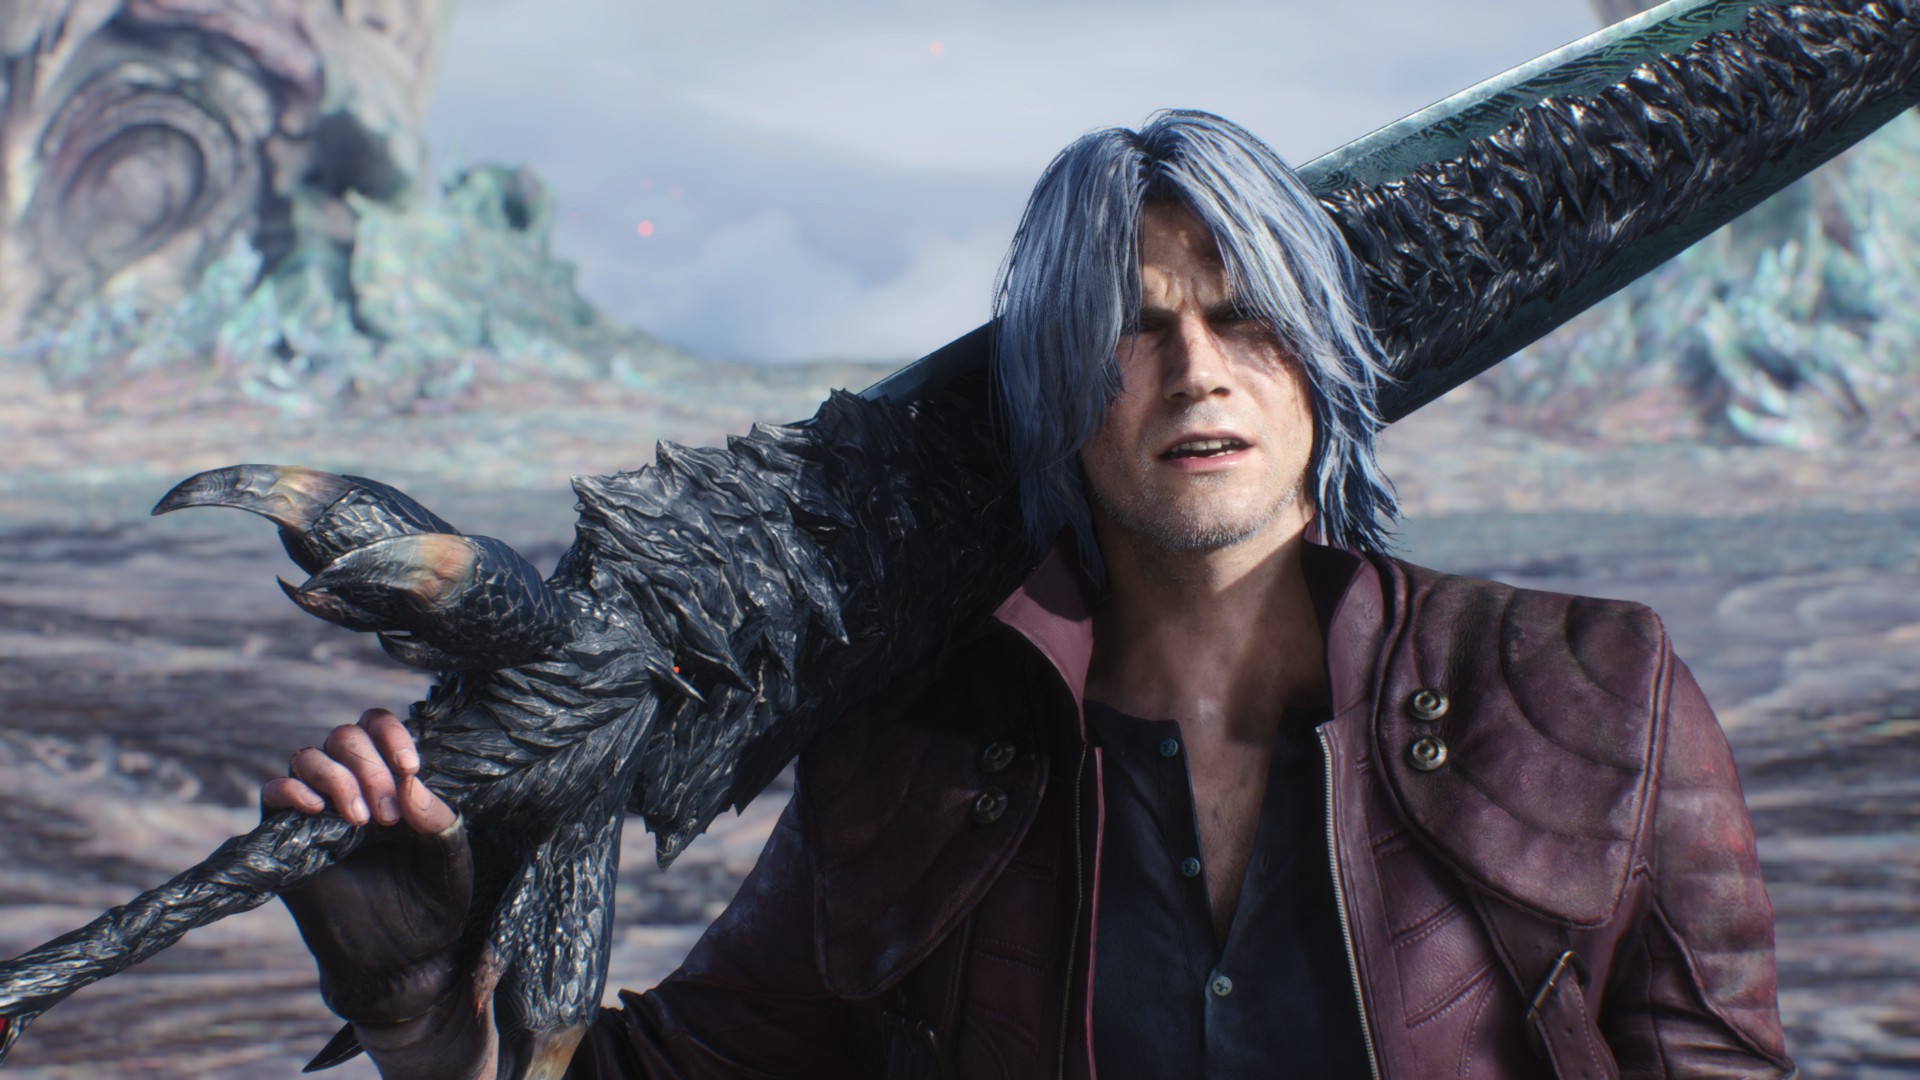 General 1920x1080 Devil May Cry Dante (Devil May Cry) Devil May Cry 5 video game characters